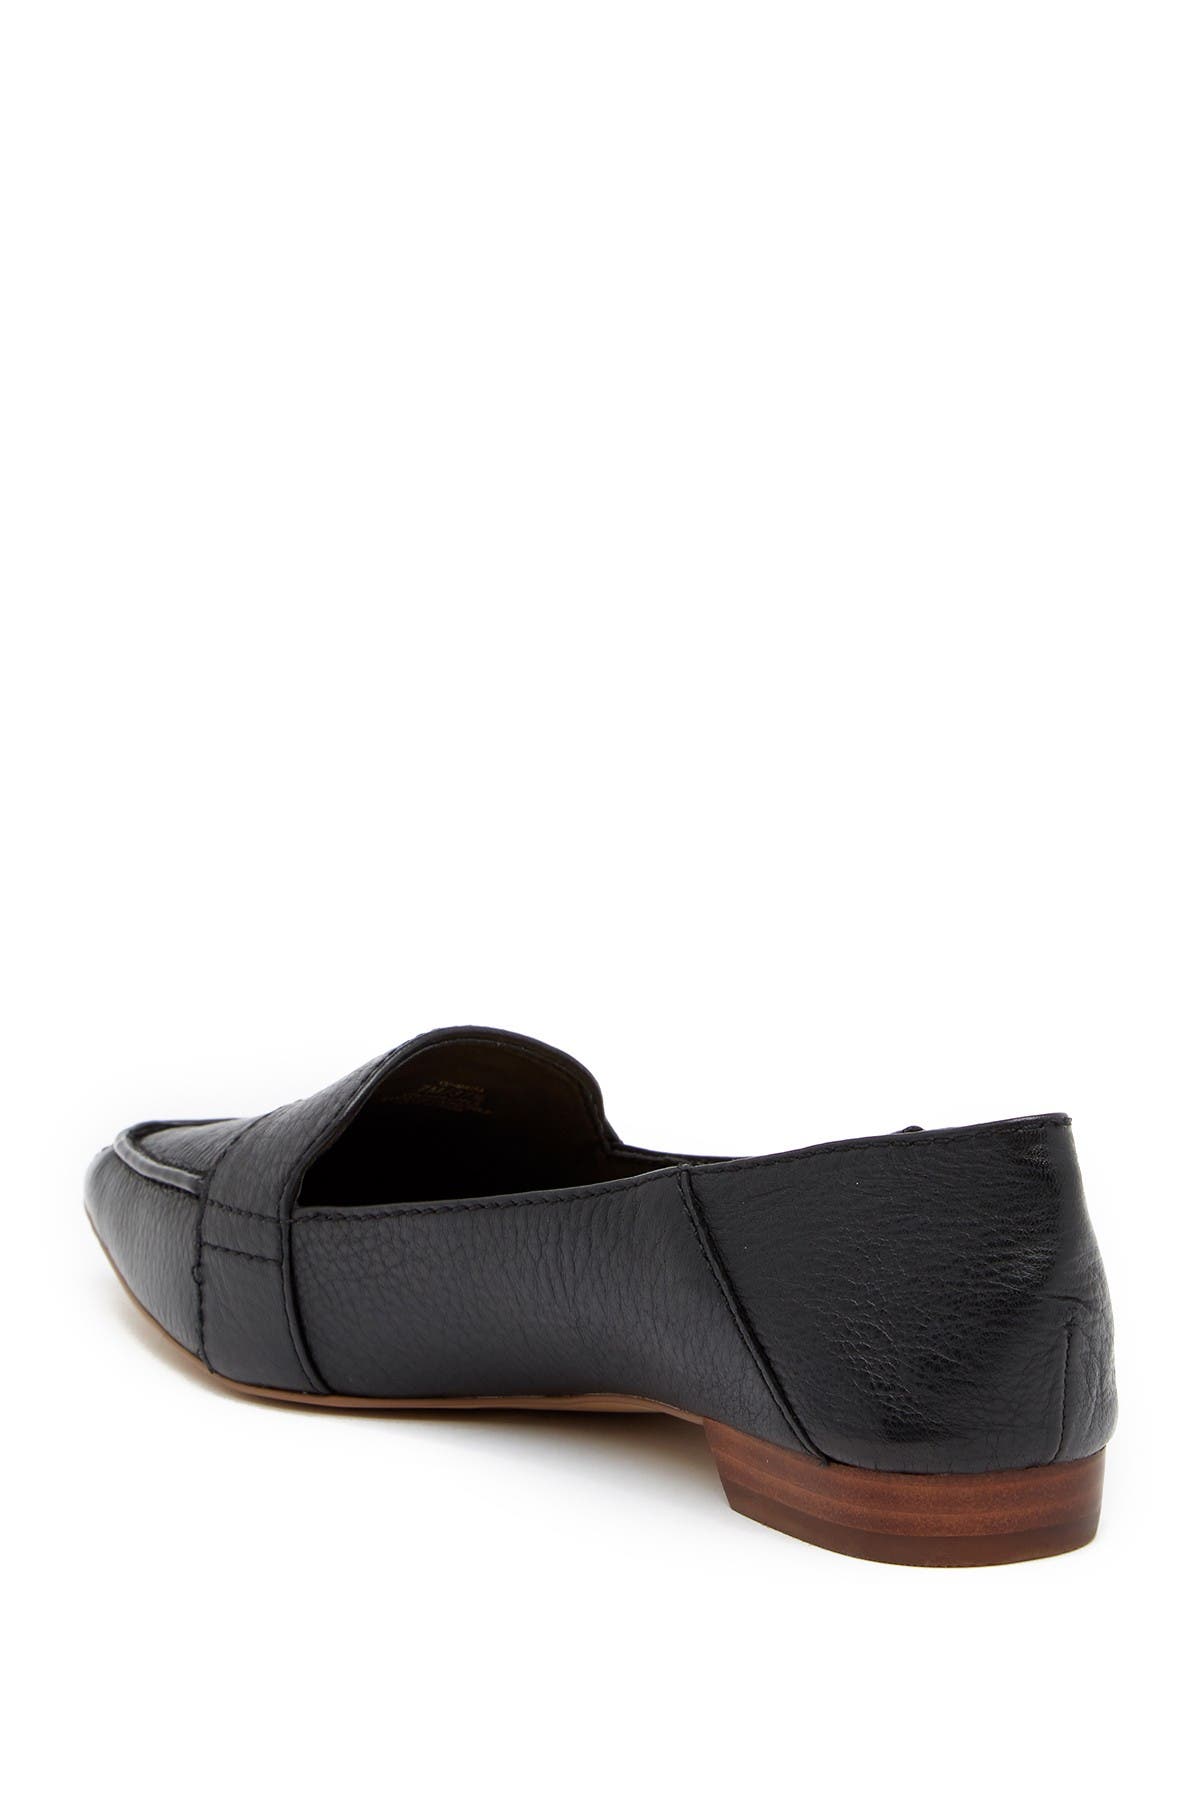 vince camuto maita pointed toe leather loafer